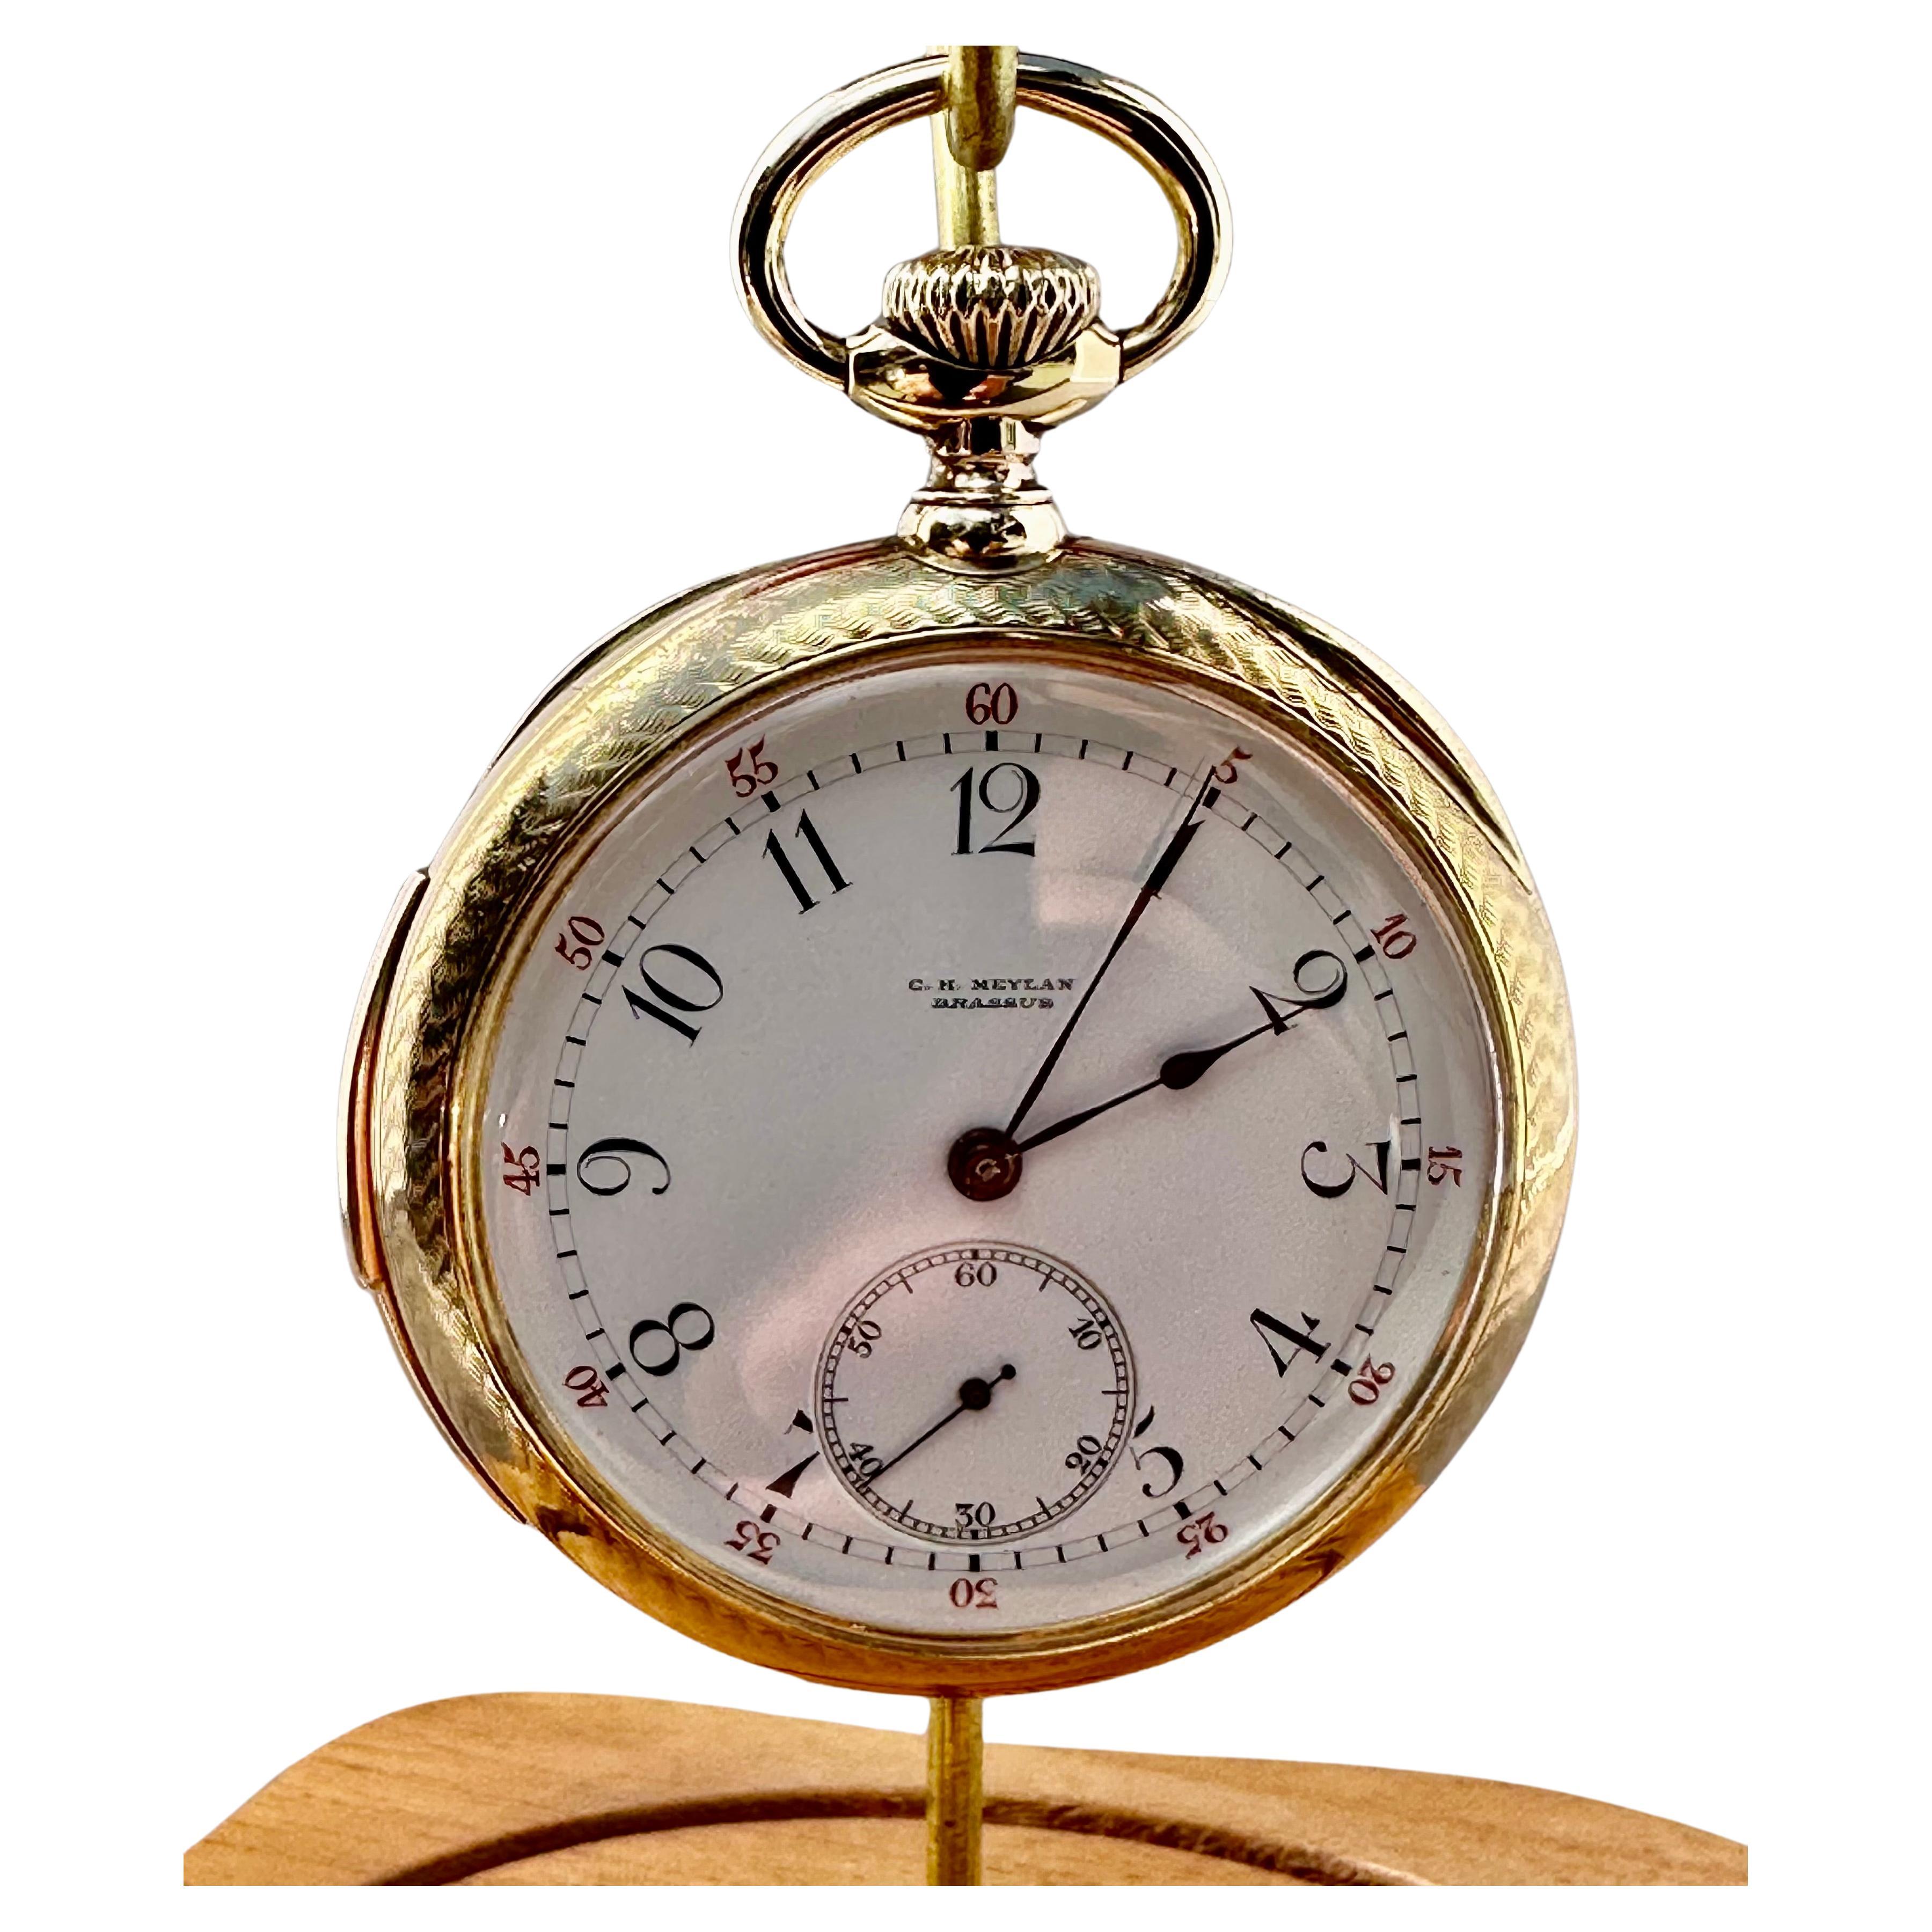 C.H. Meylan 18K Gold Keyless Lever Minute Repeater Pocket Watch Circa 1890's For Sale